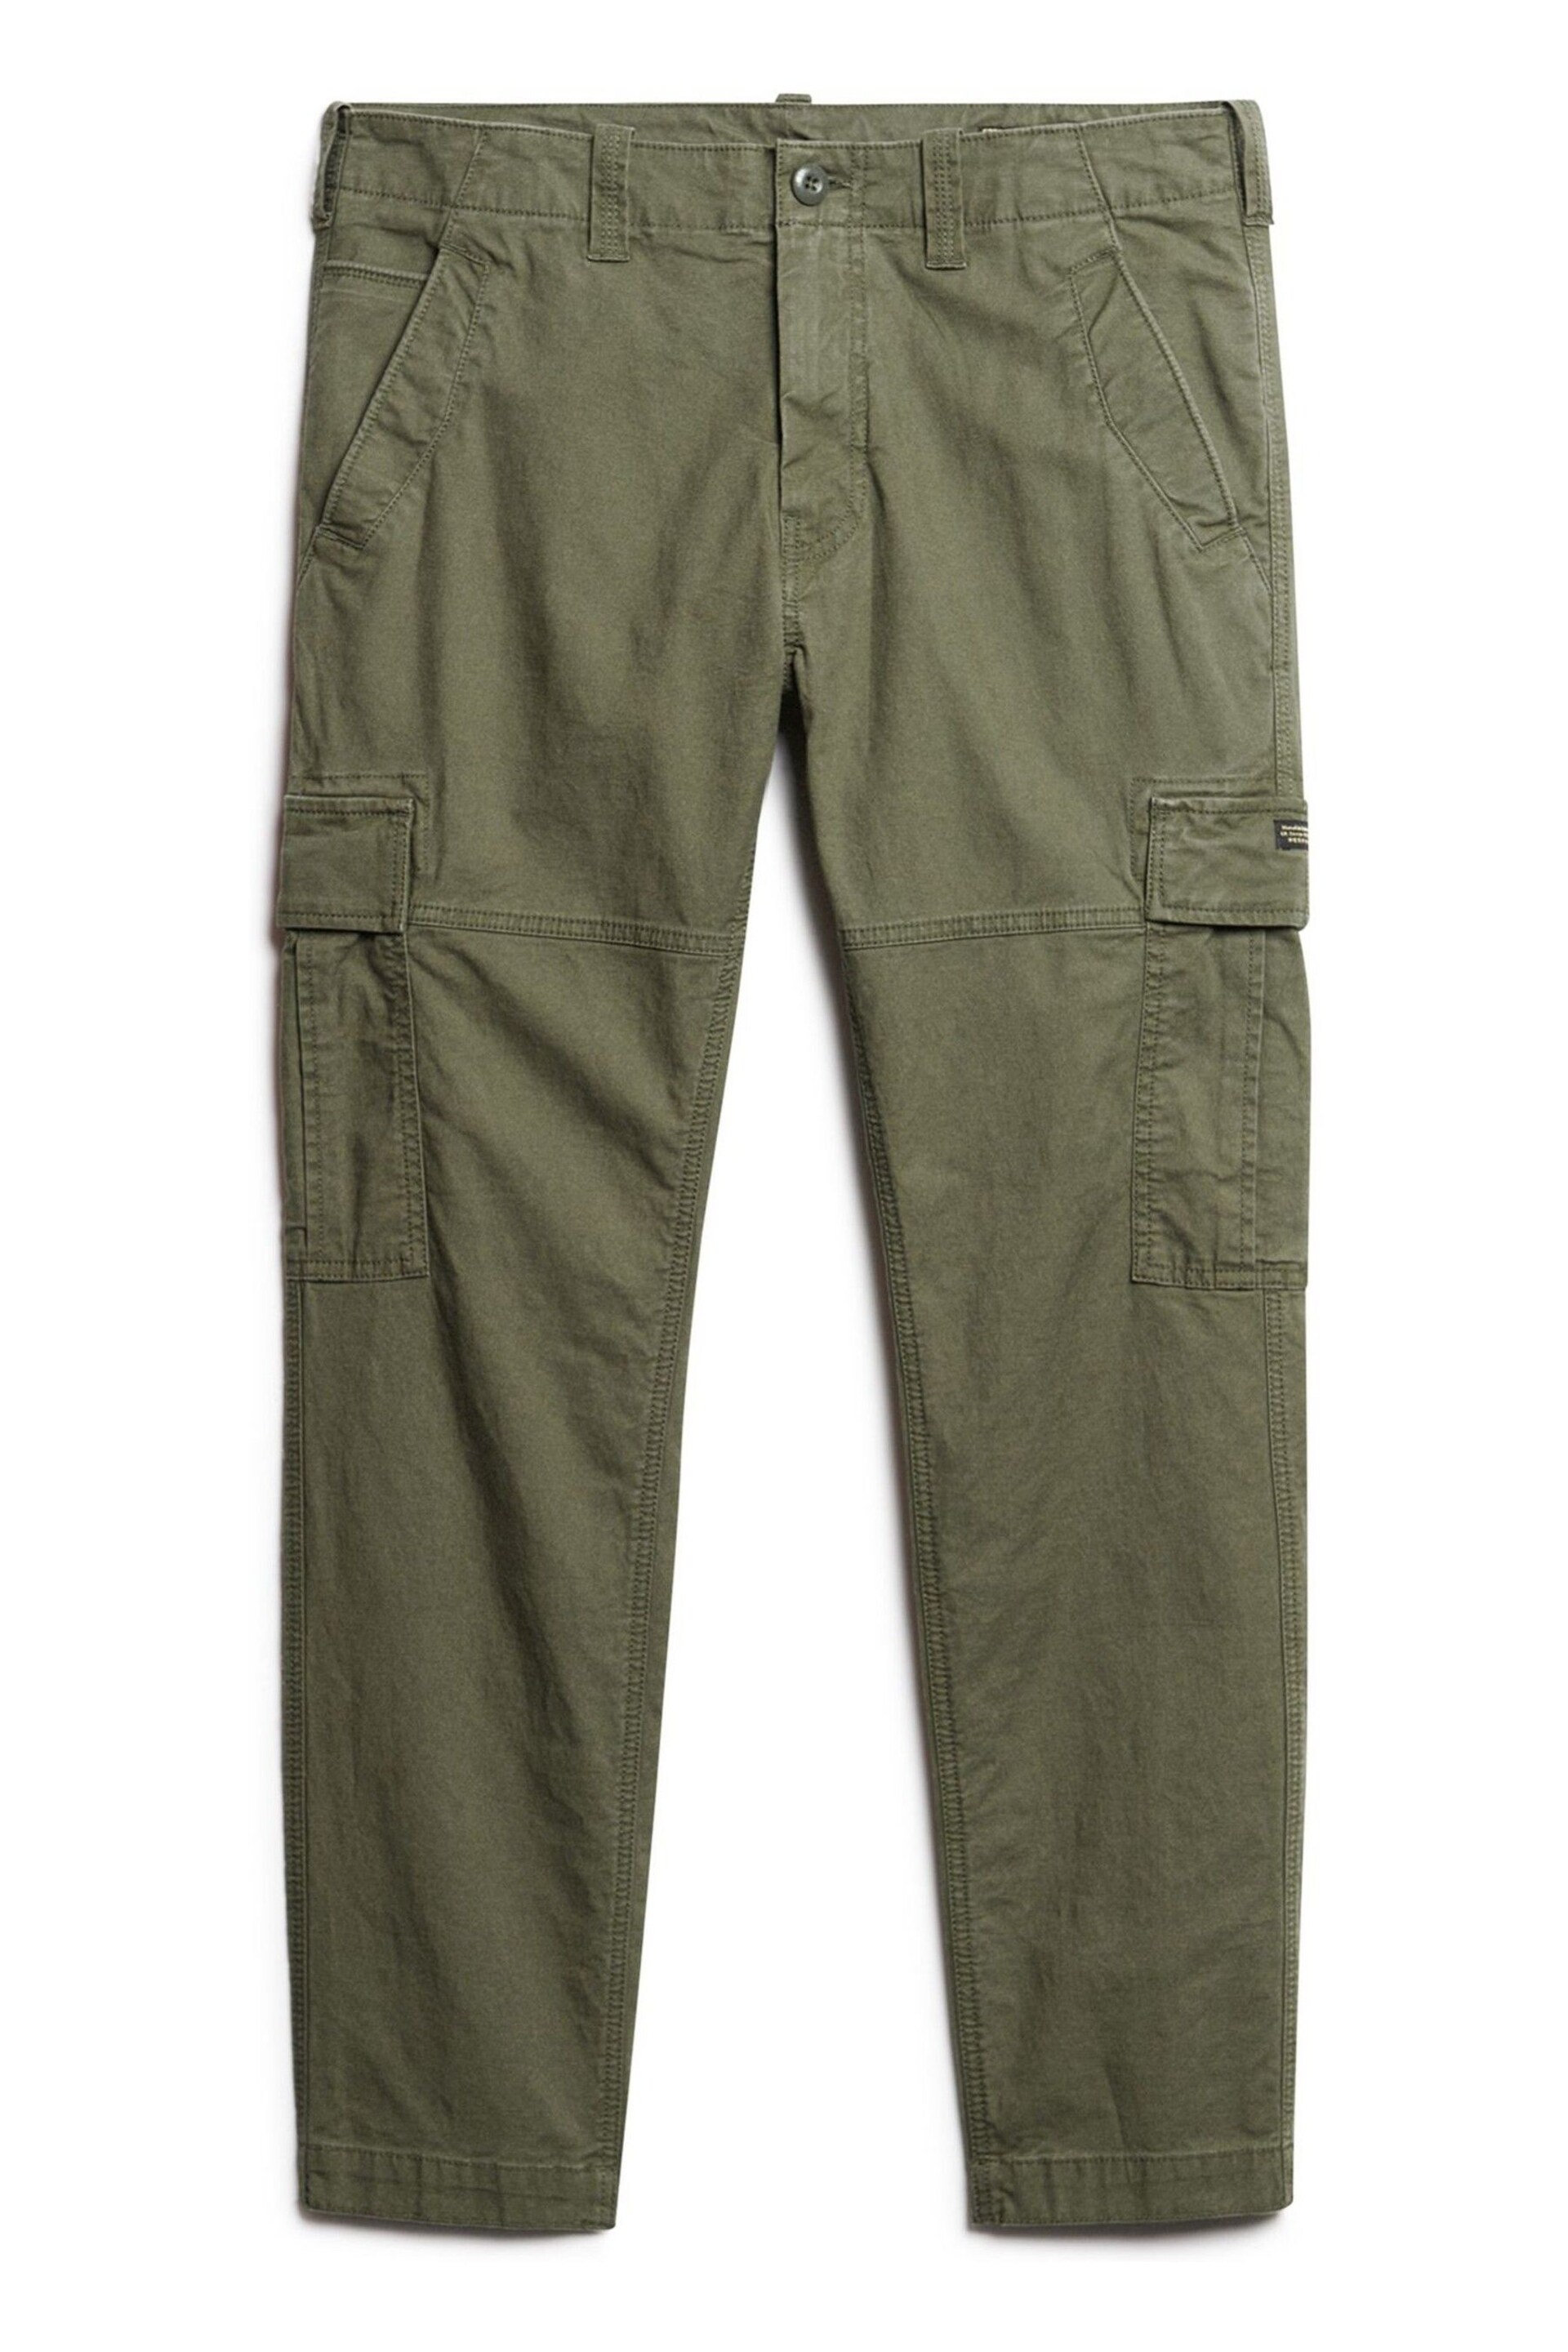 Superdry Green Core Cargo Trousers - Image 5 of 7